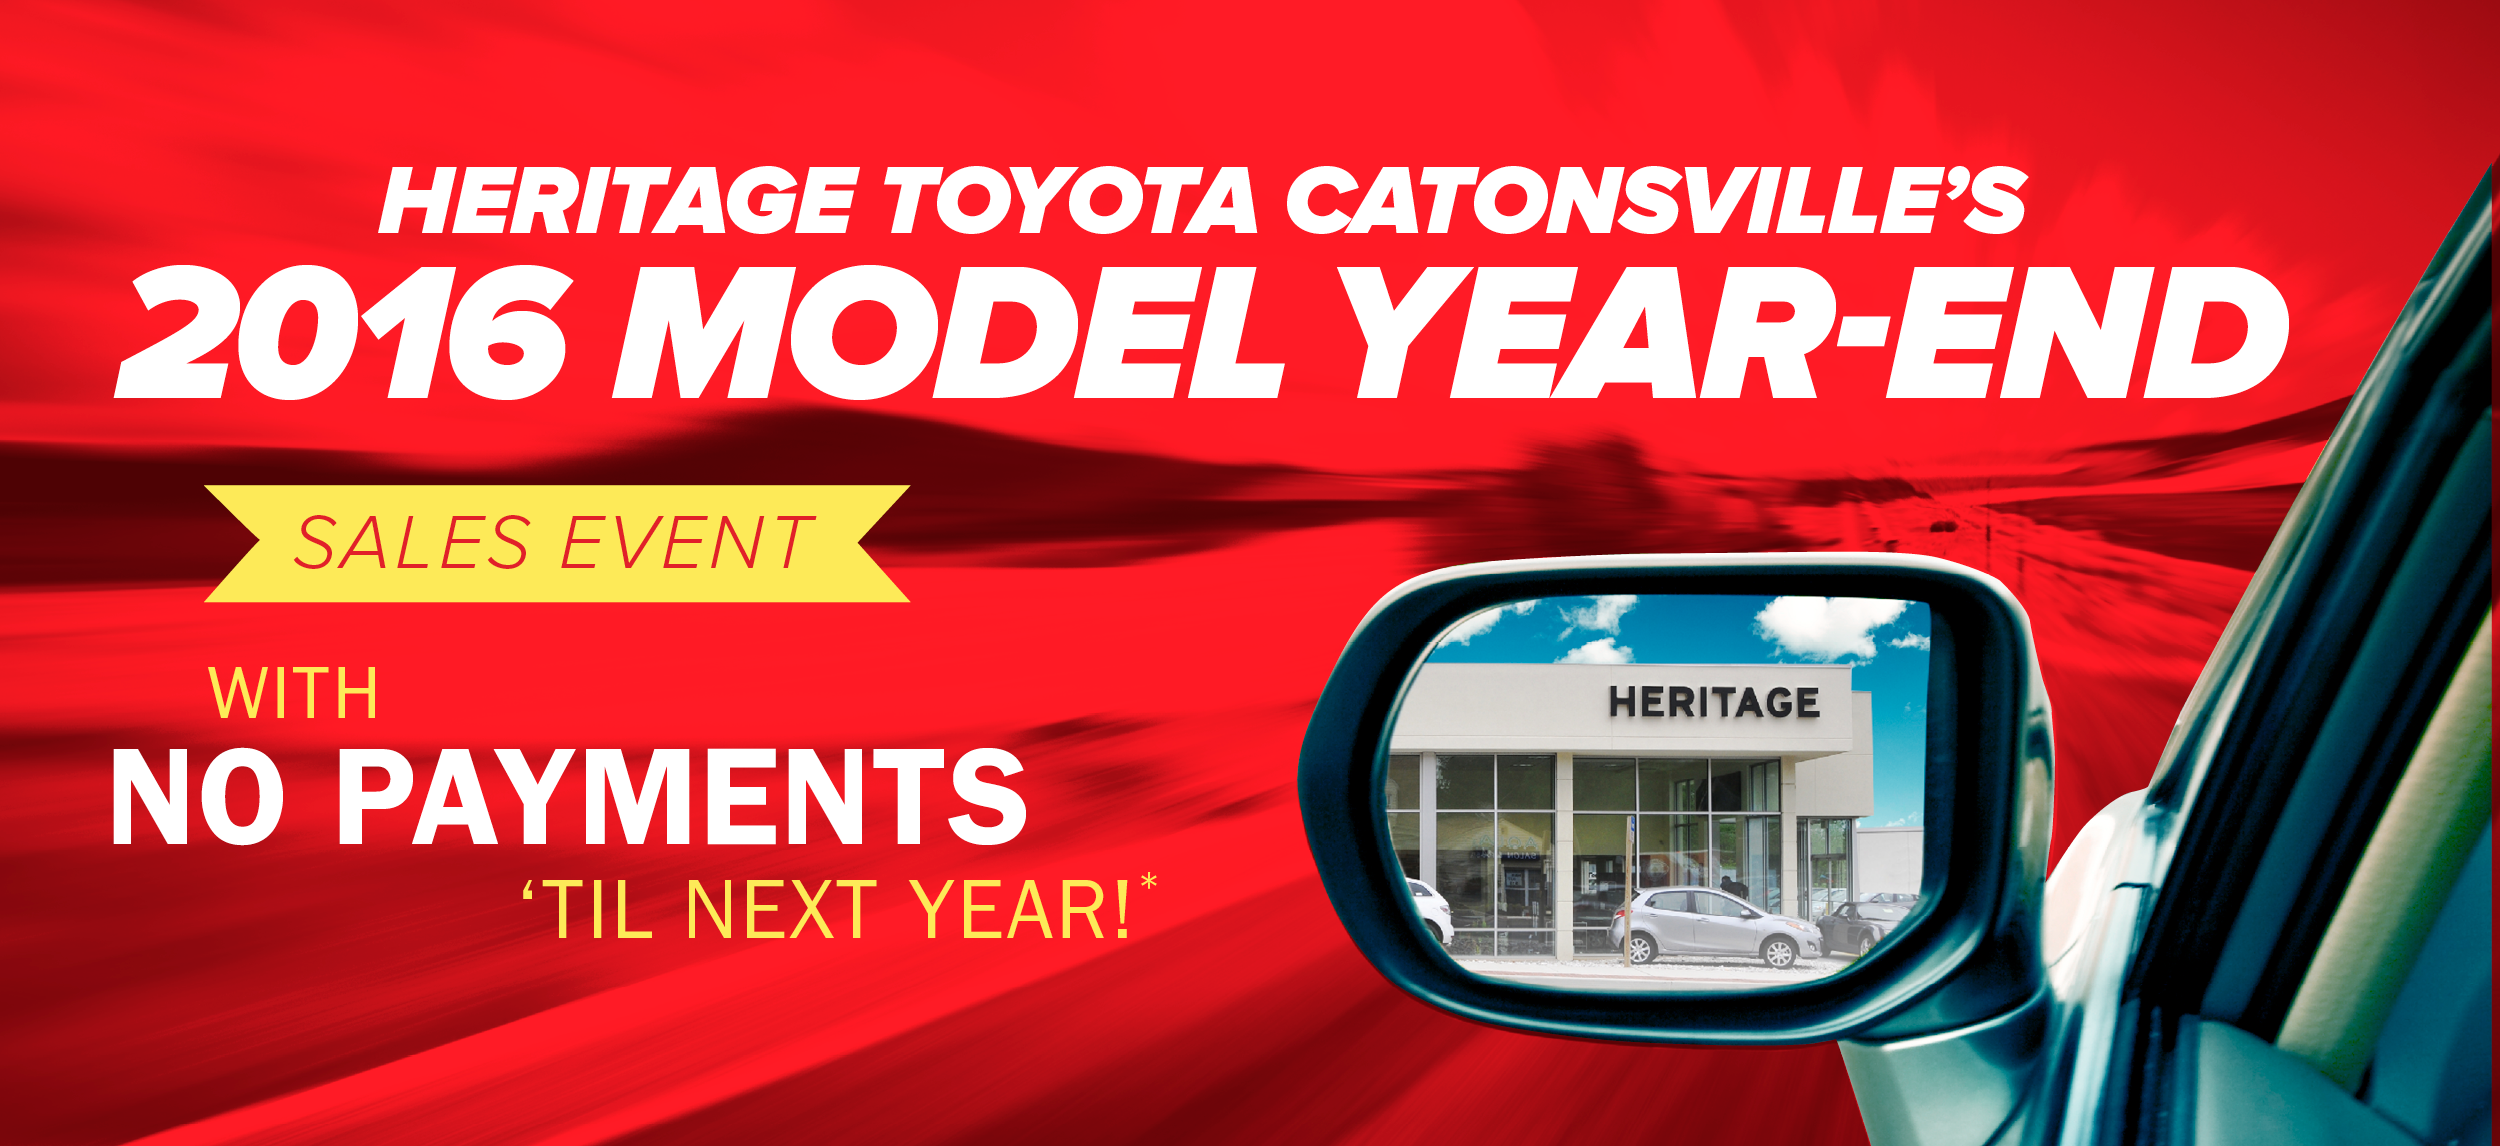 Model Year-End Sales Event